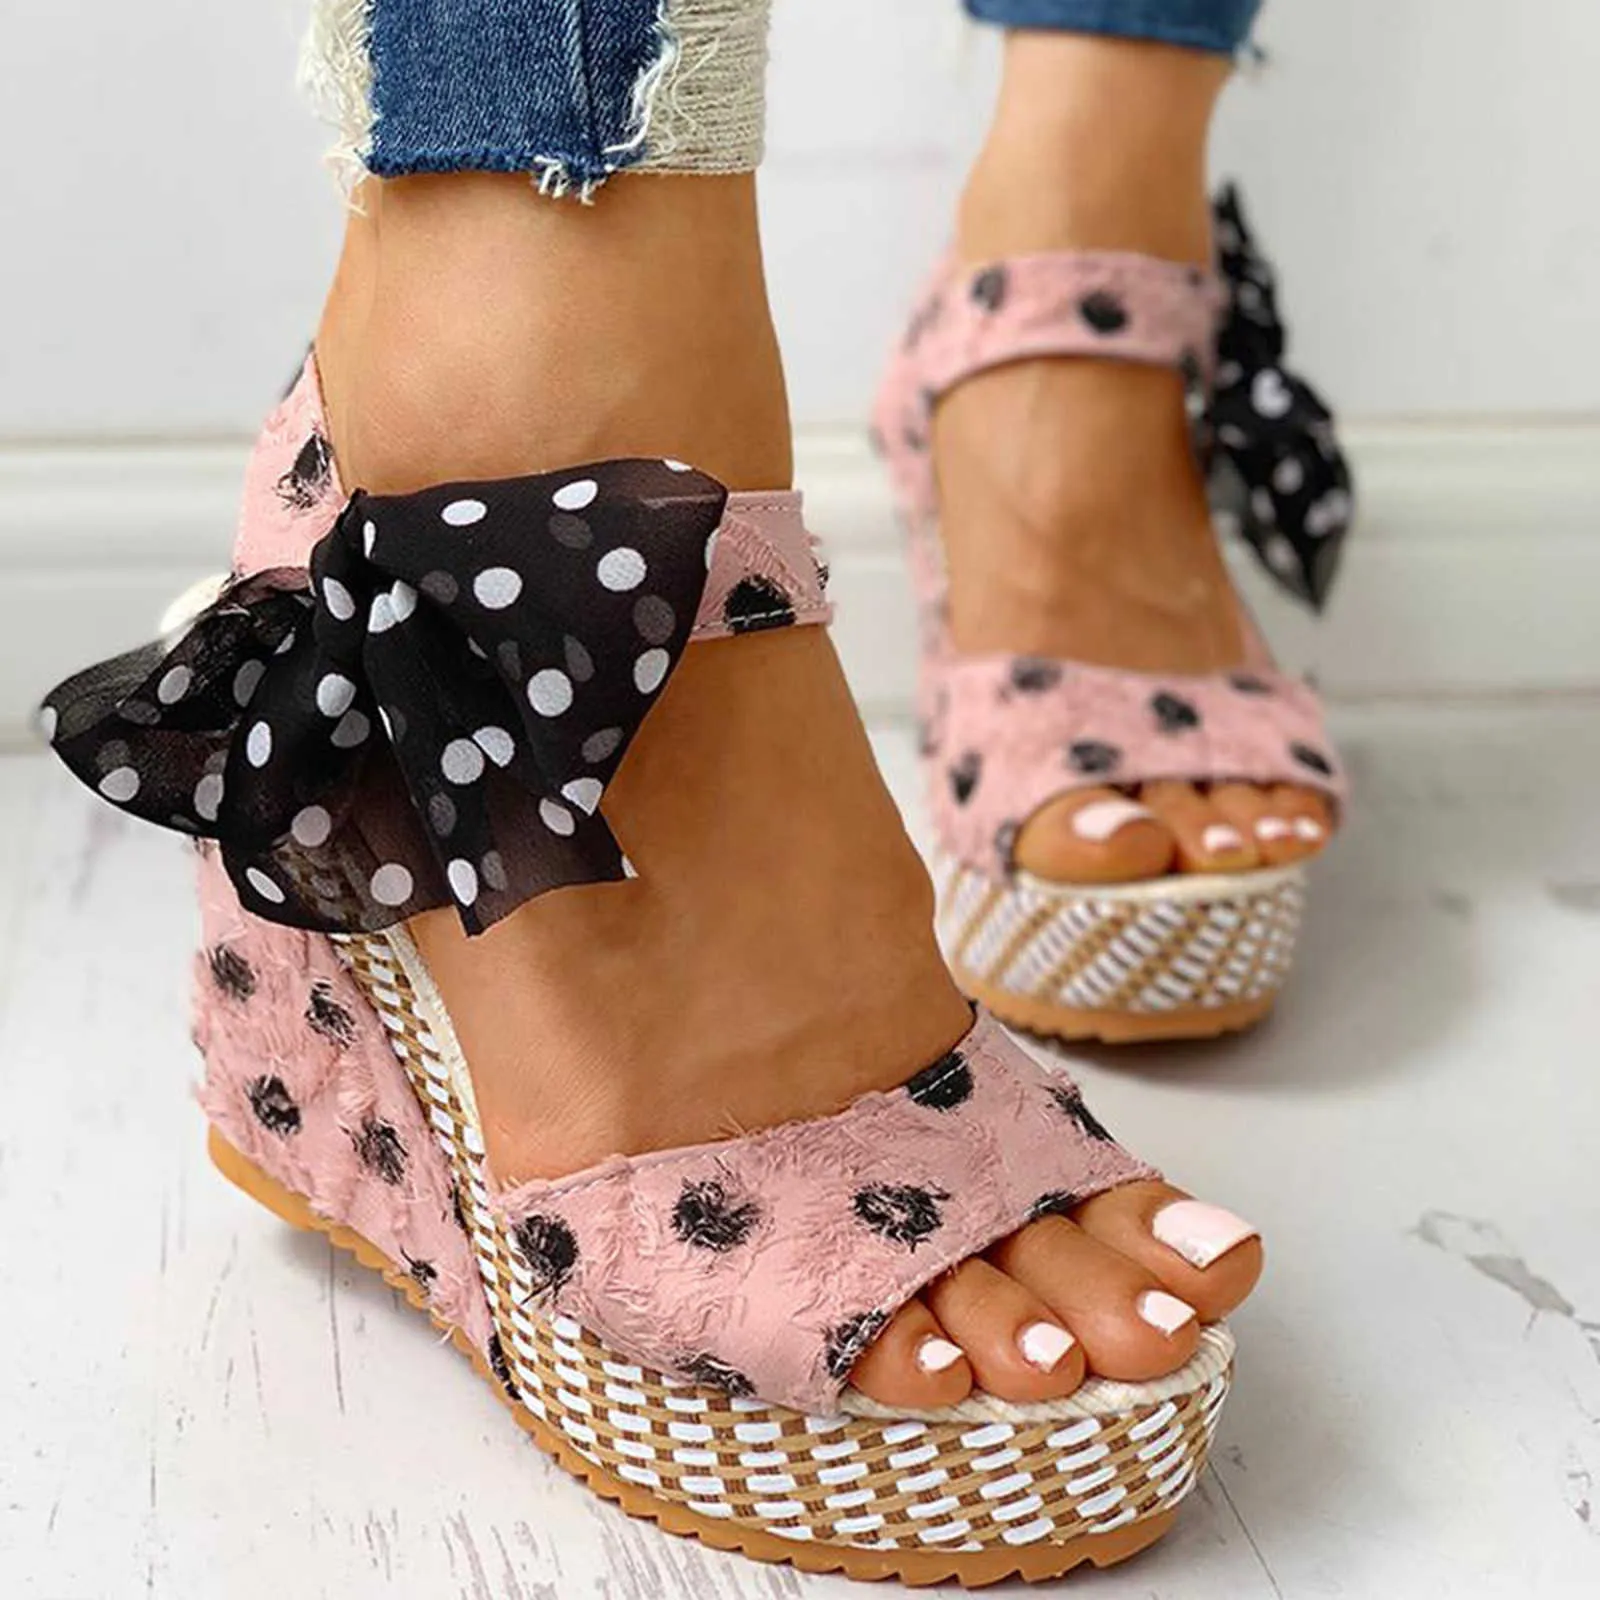 TELOTUNY sandals Women's Platform Wedges Heel Sandals Fashion Cotton Fabric Dot Lace-up Shoes Footwear 2021 Summer Y0721